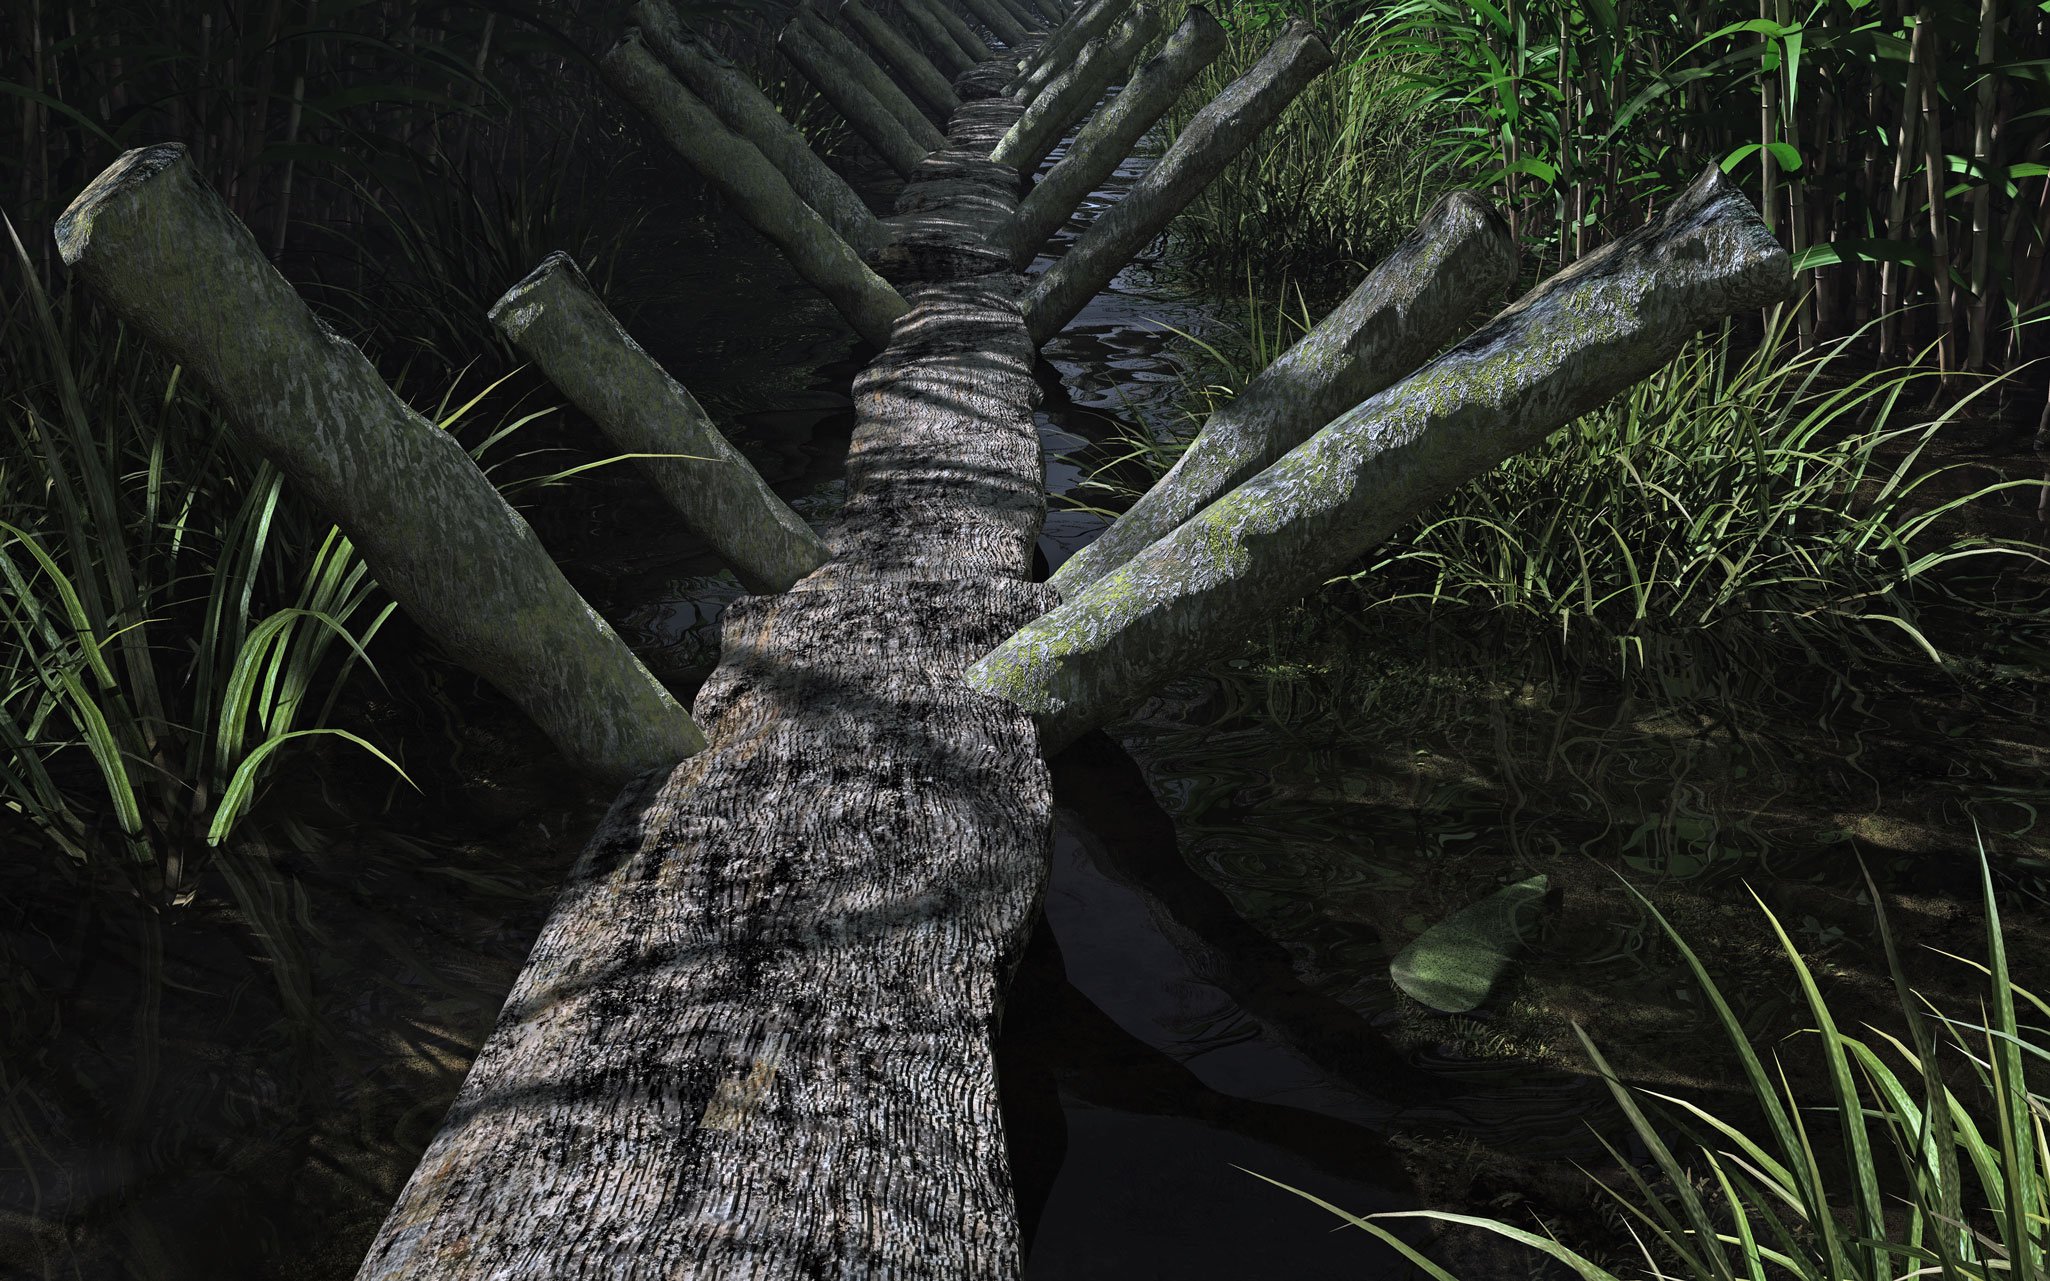 Reconstruction of a narrow timber track in a reedbed; a polished axehead is depicted in the water to one side of the track.